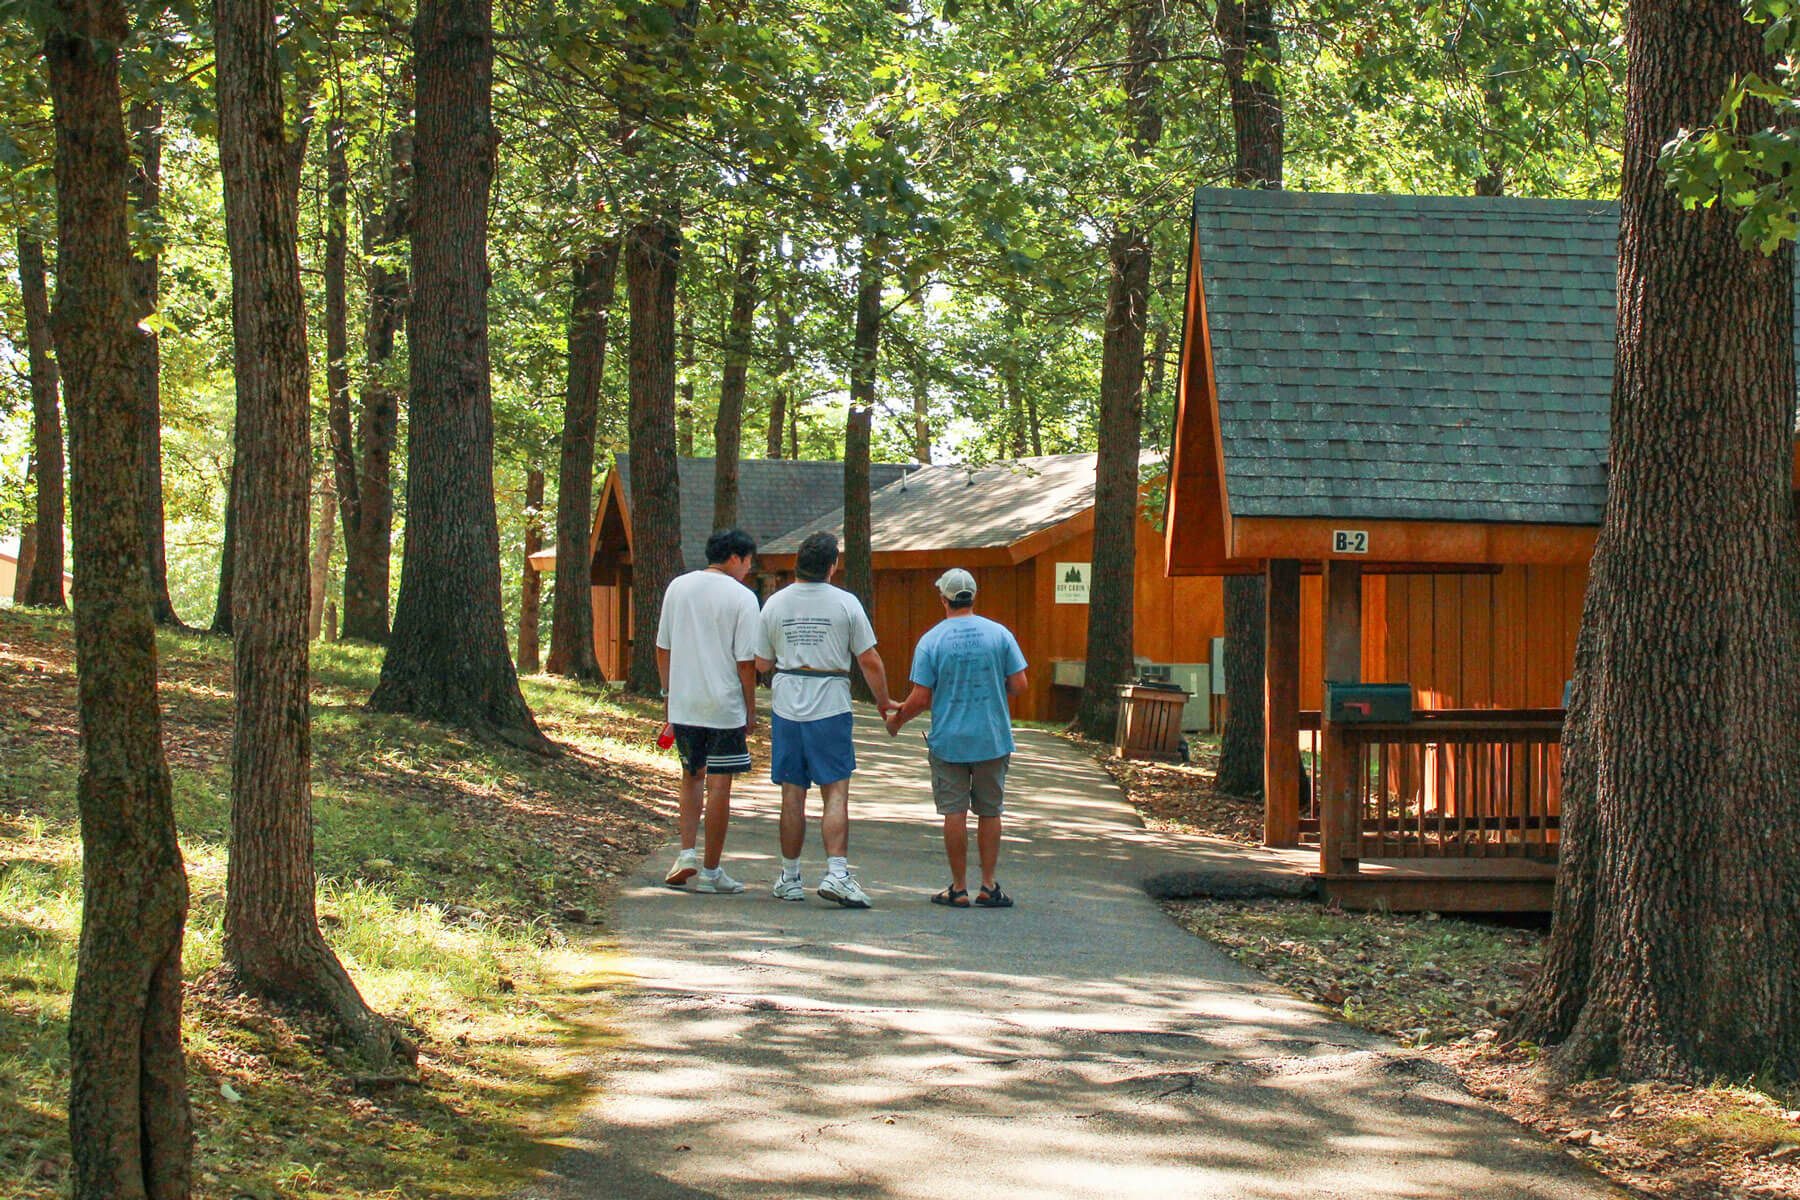 Campers walking on a path amid cabins, trees, and shadows